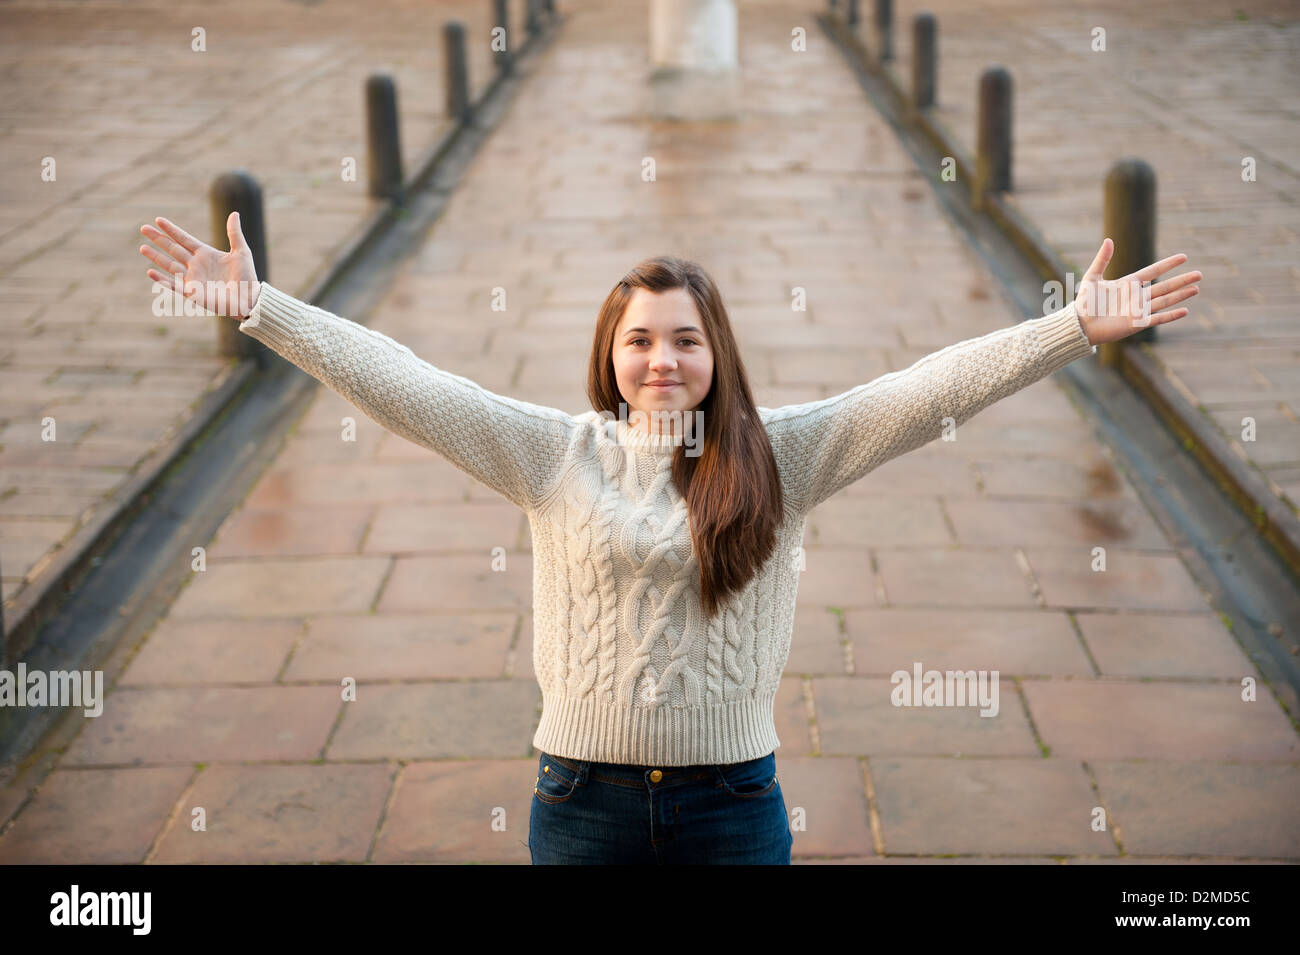 https://c8.alamy.com/comp/D2MD5C/teenage-girl-with-her-arms-stretched-out-and-standing-on-a-walkway-D2MD5C.jpg